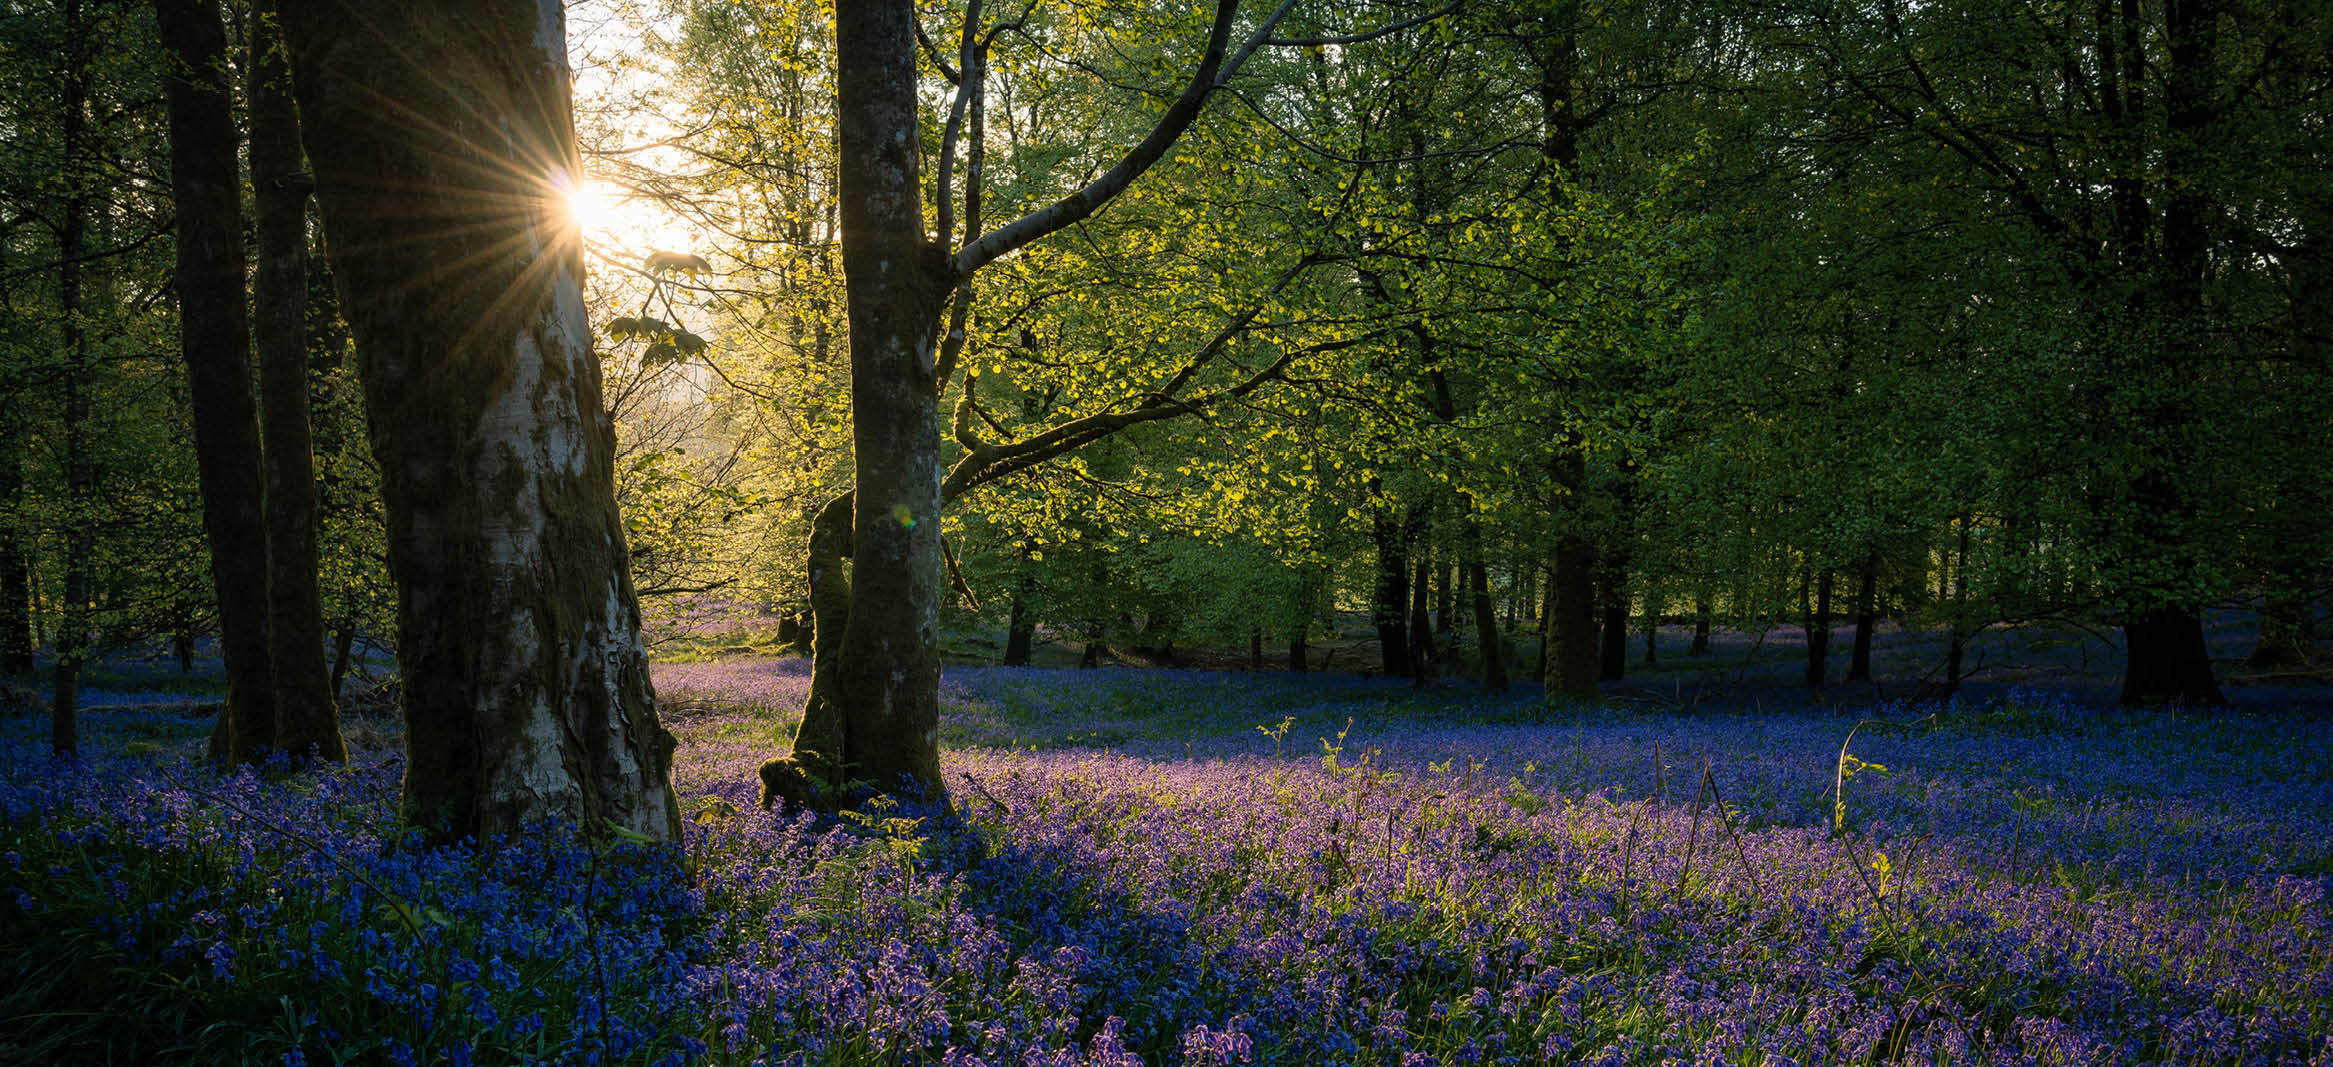 bluebell wood, guide to , thats entertainment, surrey, whats on, things to do, nature, countryside